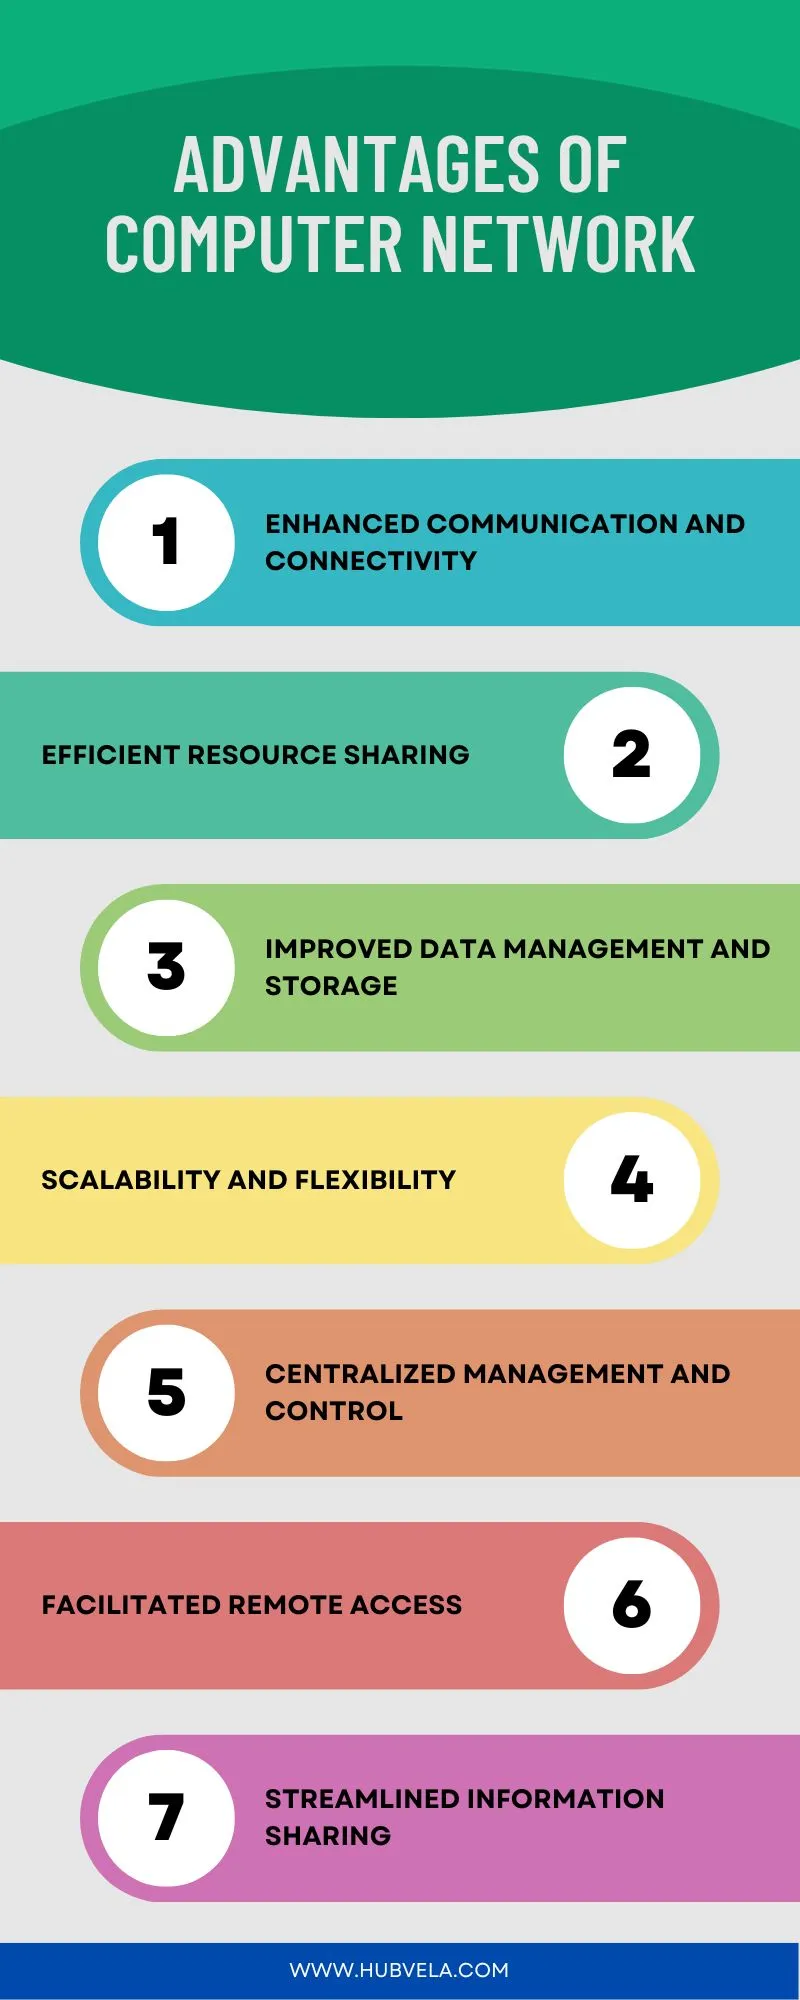 Advantages of Computer Network Infographic